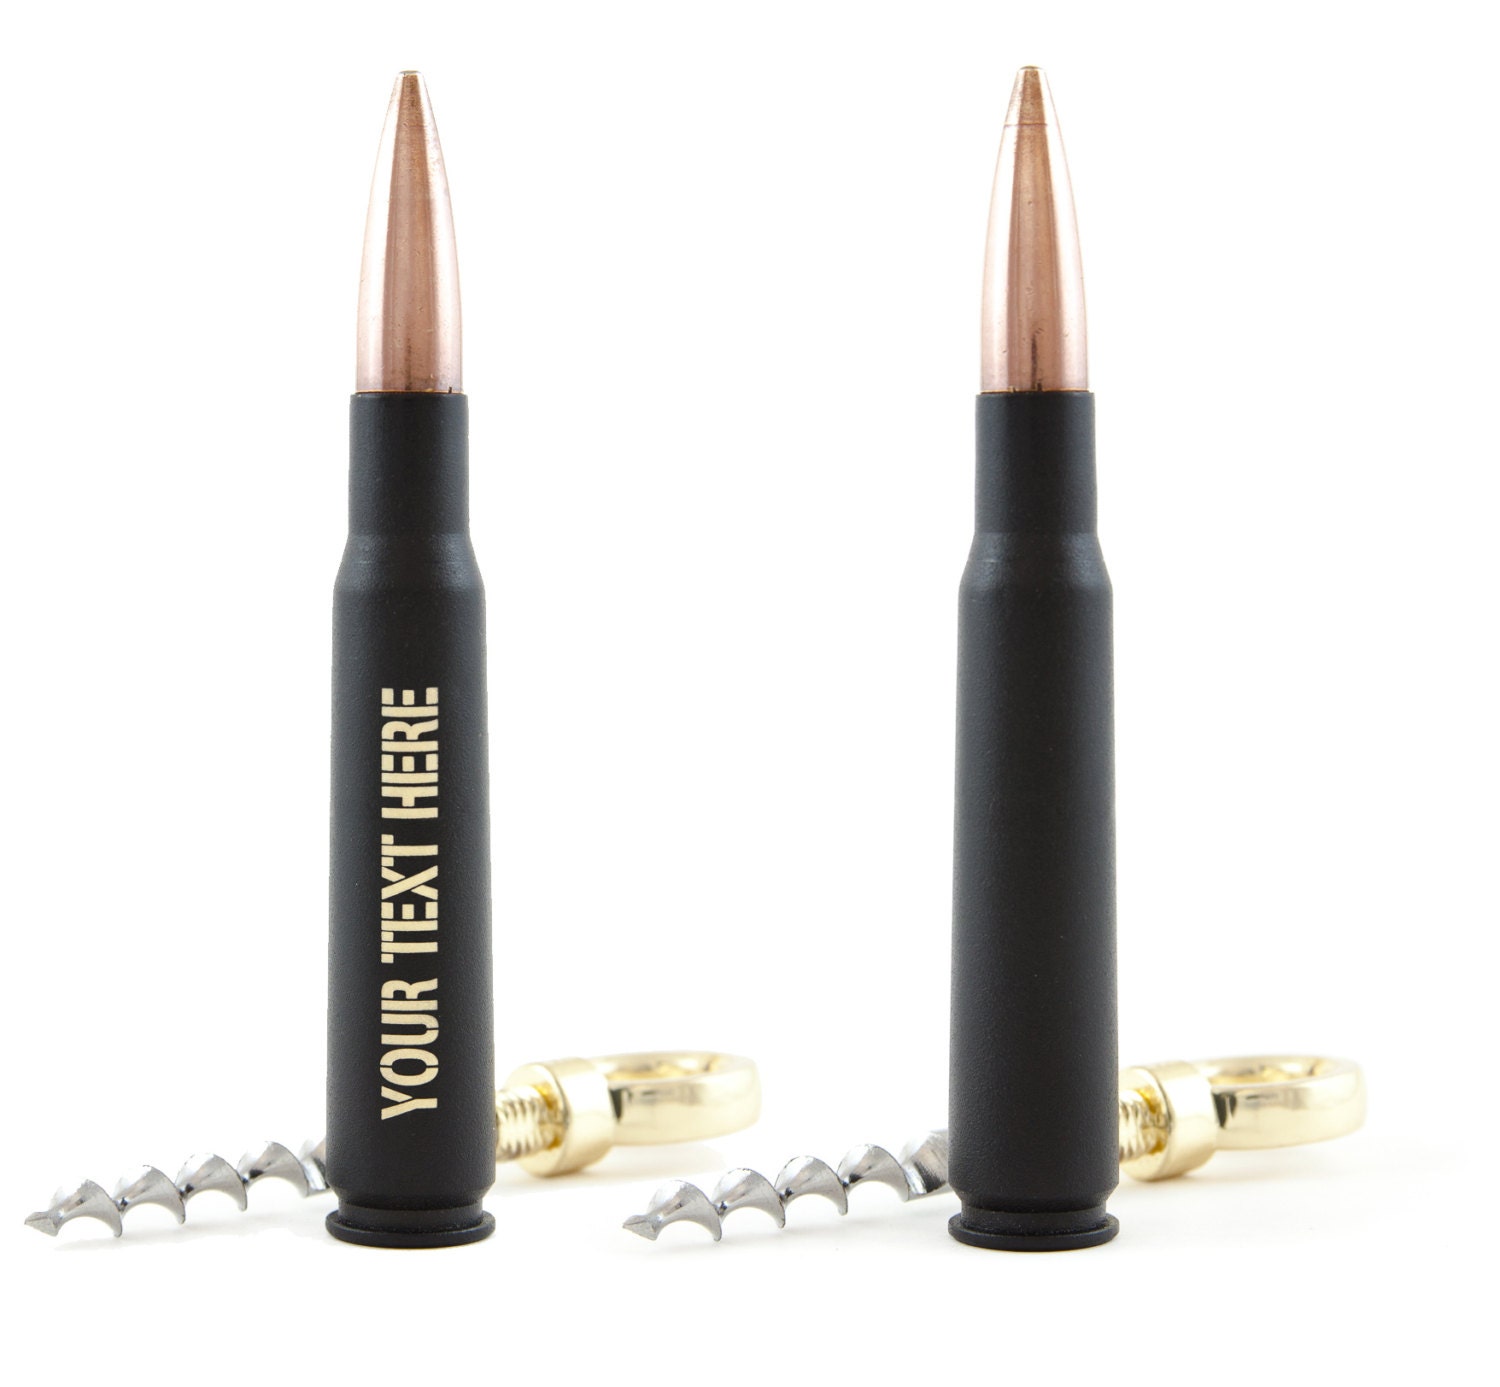 50 Caliber BMG Real Bullet Corkscrew in Matte by LuckyShotUSA